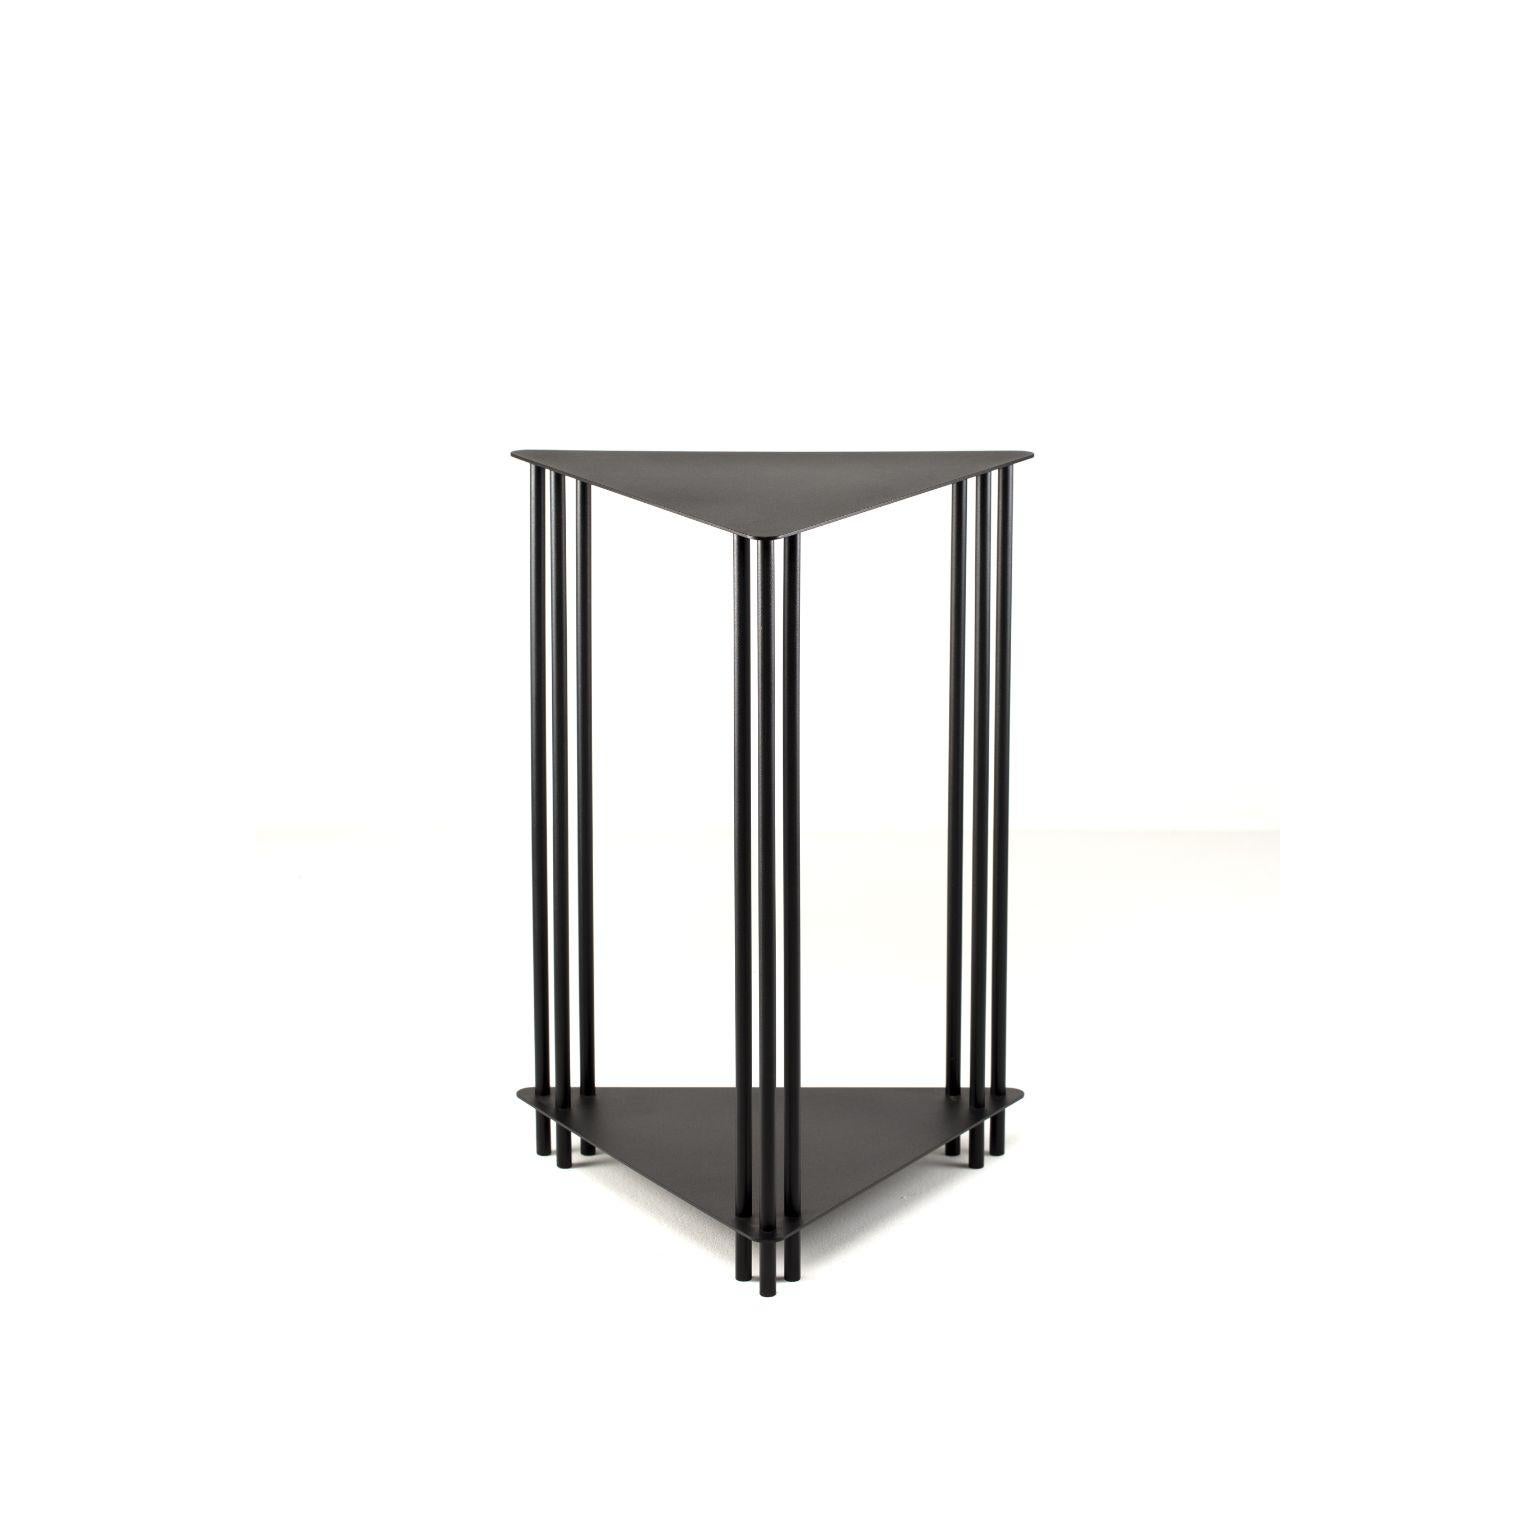 Dureza - Support table by Cultivado Em Casa
Dimensions: 43 x 38 x 60 cm
Materials: Carbon steel and electrostatic painting.

The side table is part of the Dureza collection. Carbon steel reigns as the raw material, guiding both the simple and